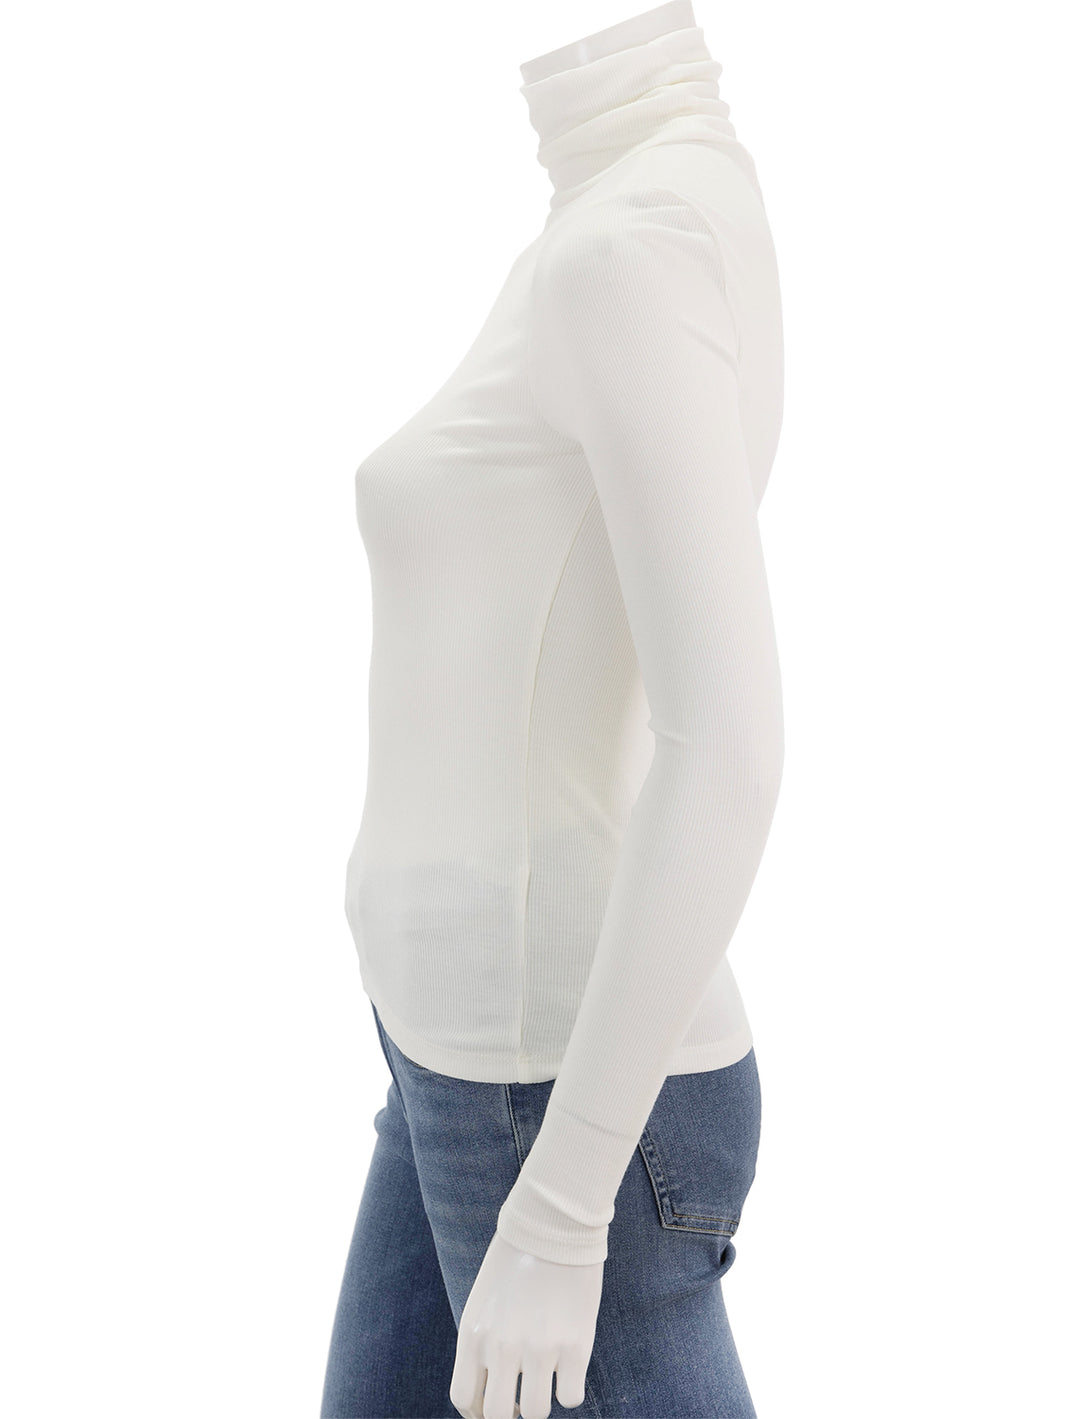 Side view of Marine Layer's lexi rib turtleneck in antique white.